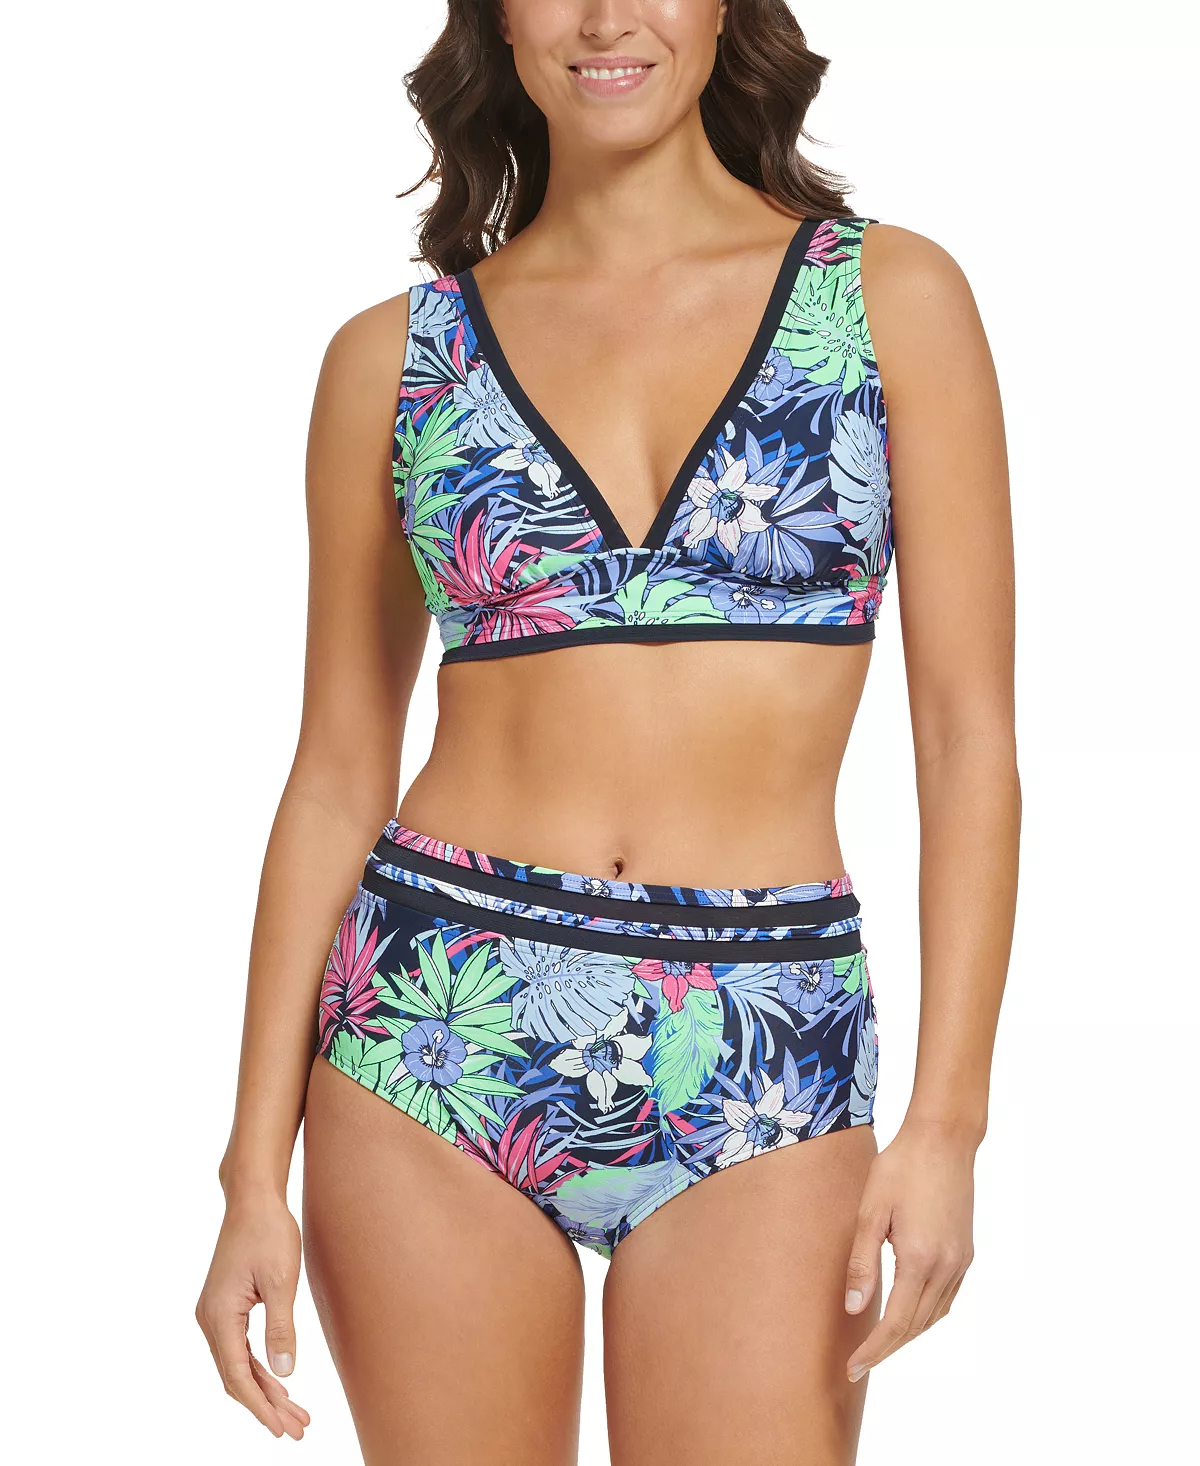 Rectangle Body Type High Waisted Top Swimsuit